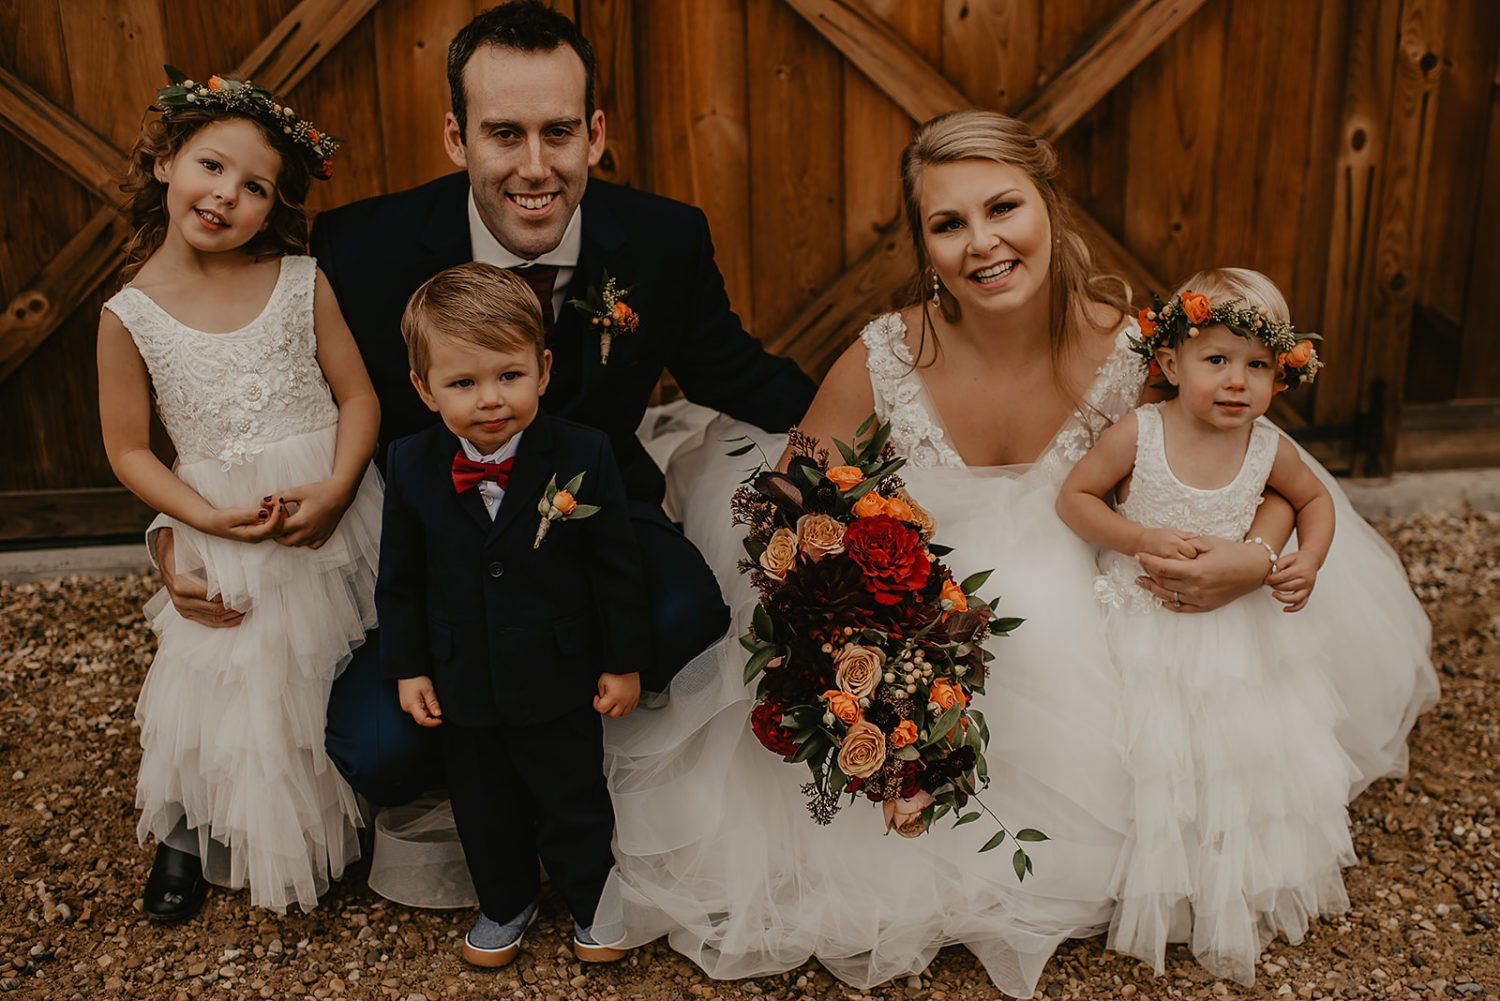 Hayley and James' Rustic Fall Wedding | Calyx Floral Design